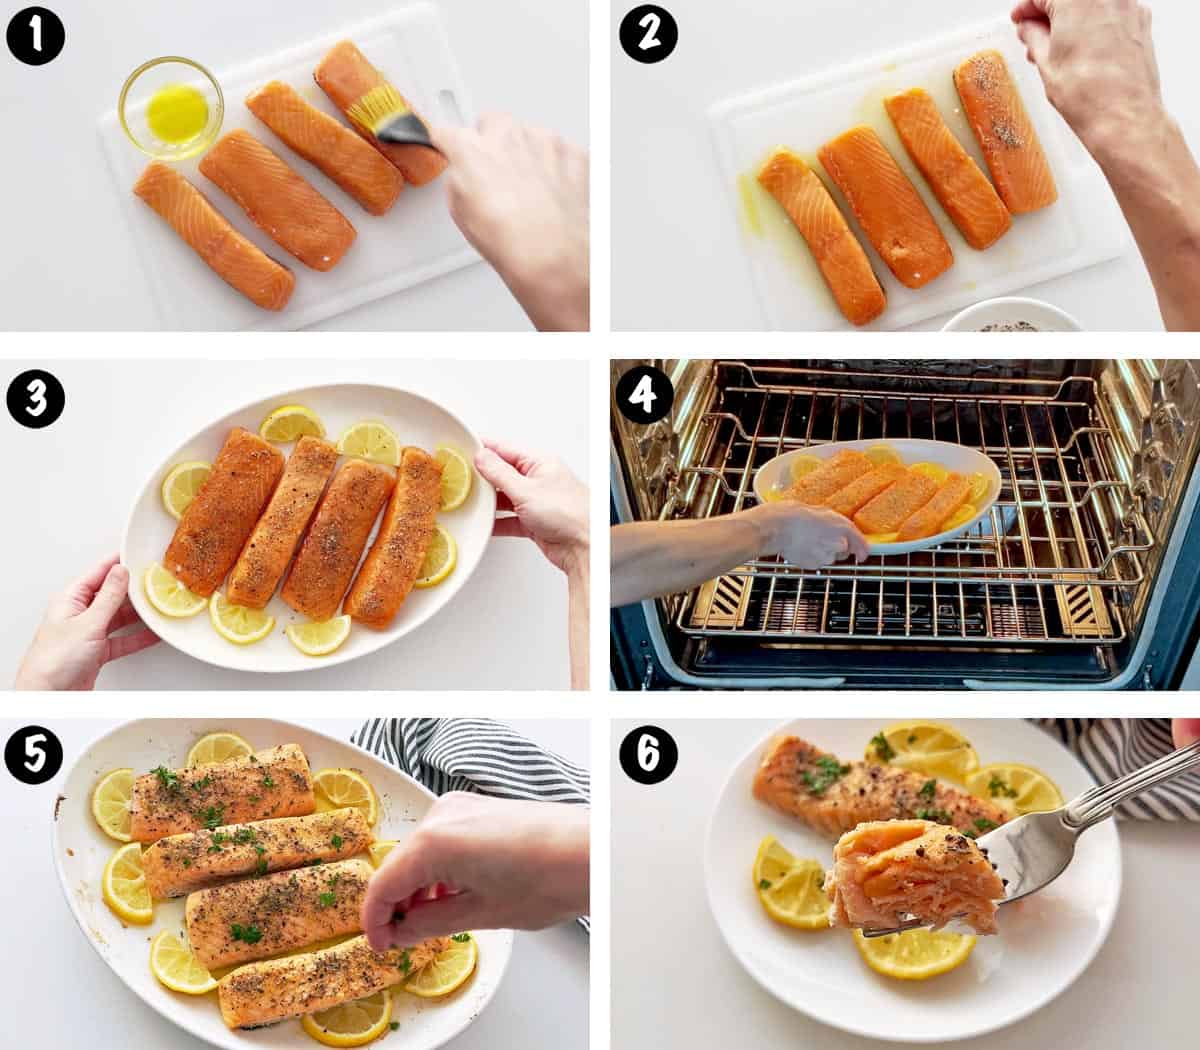 A six-photo collage showing the steps for baking salmon. 